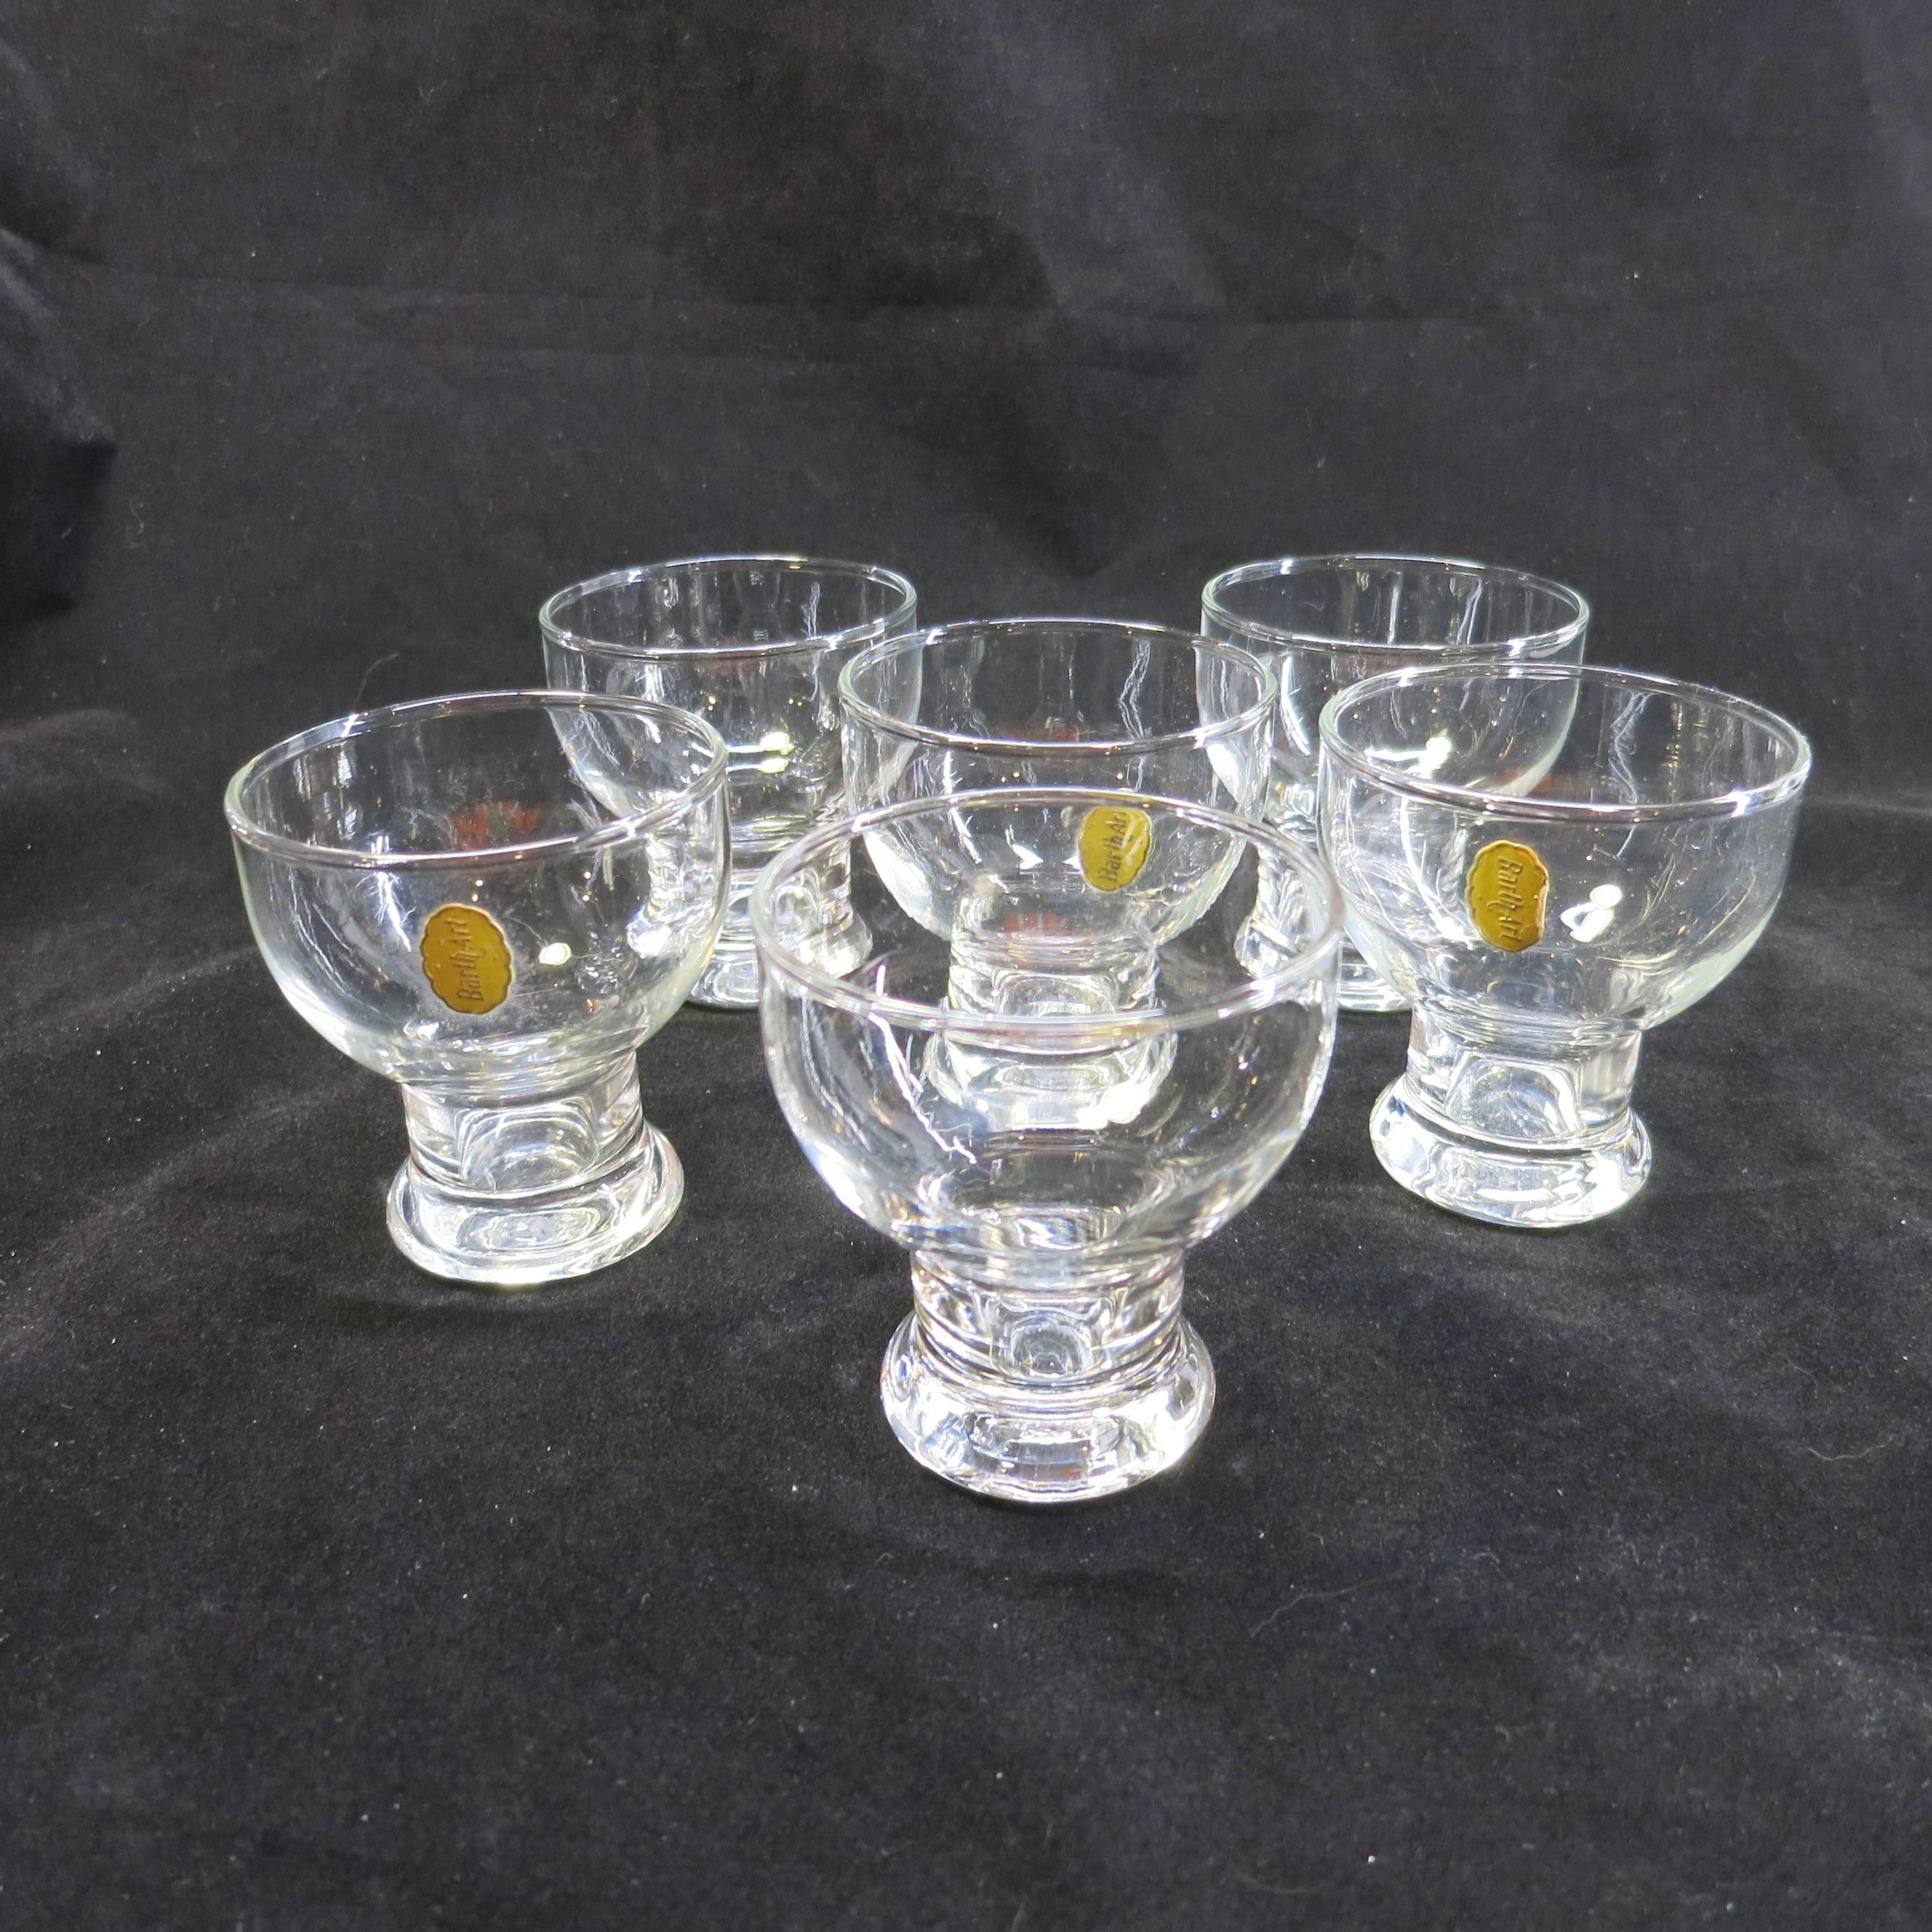 Barth Art Vintage Set of 6 Cocktail Glasses 3 Tall Clear Glass